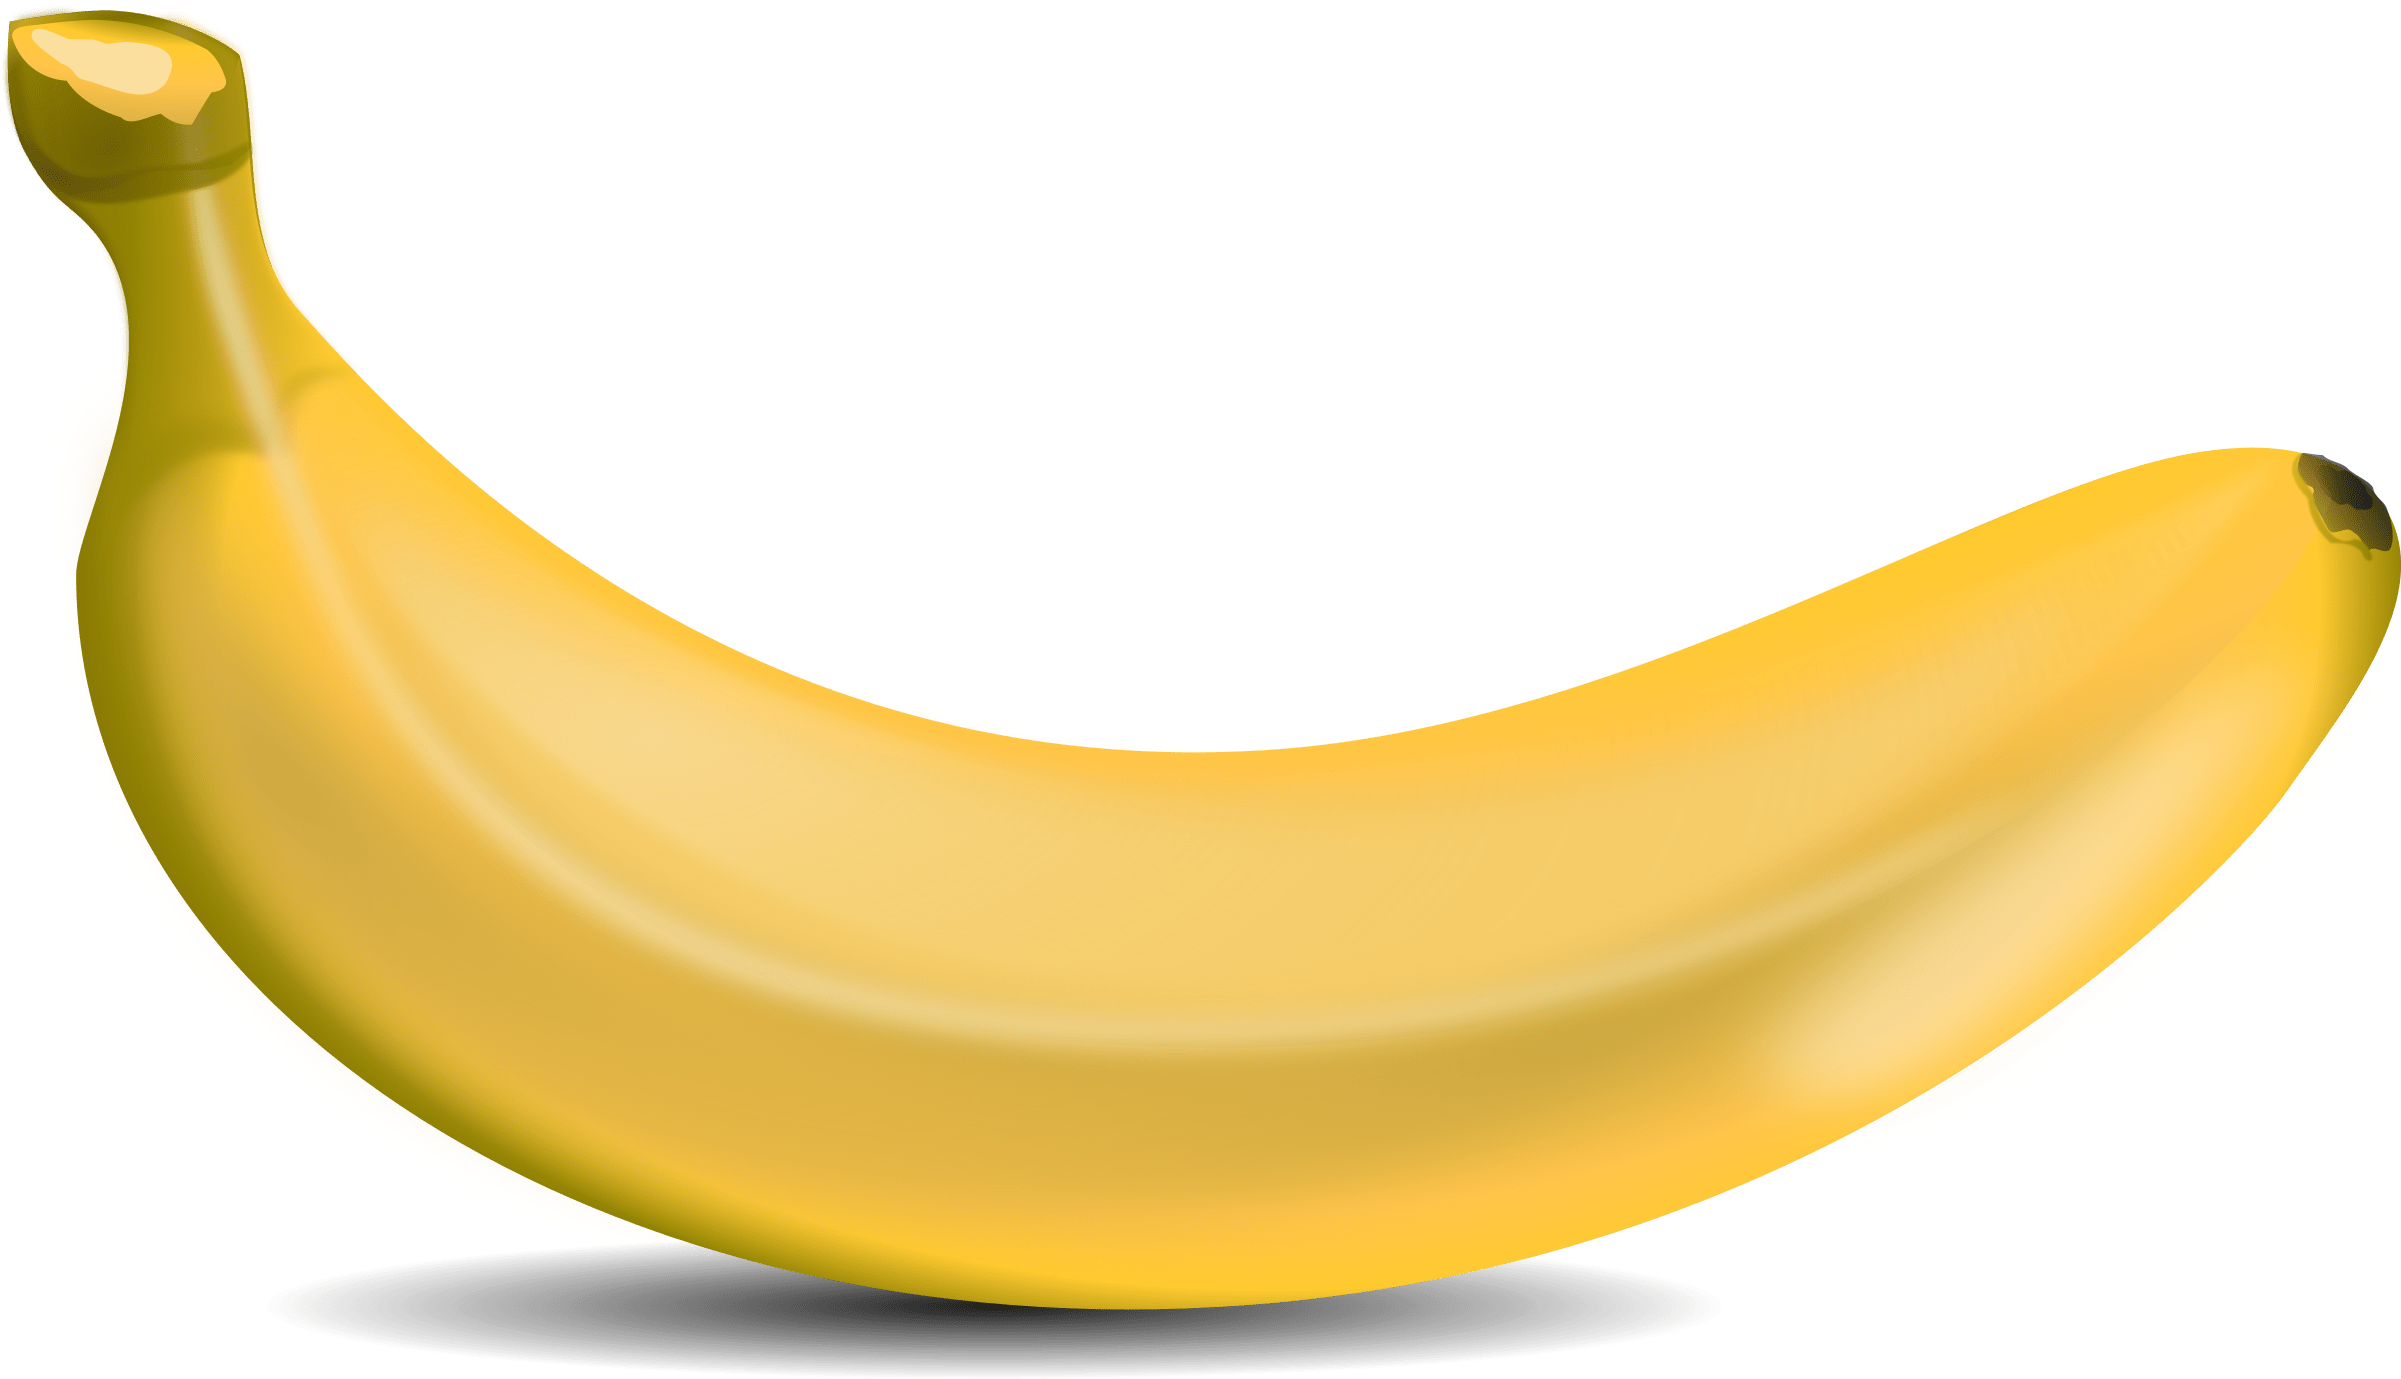 Download For Free Banana Png In High Resolution